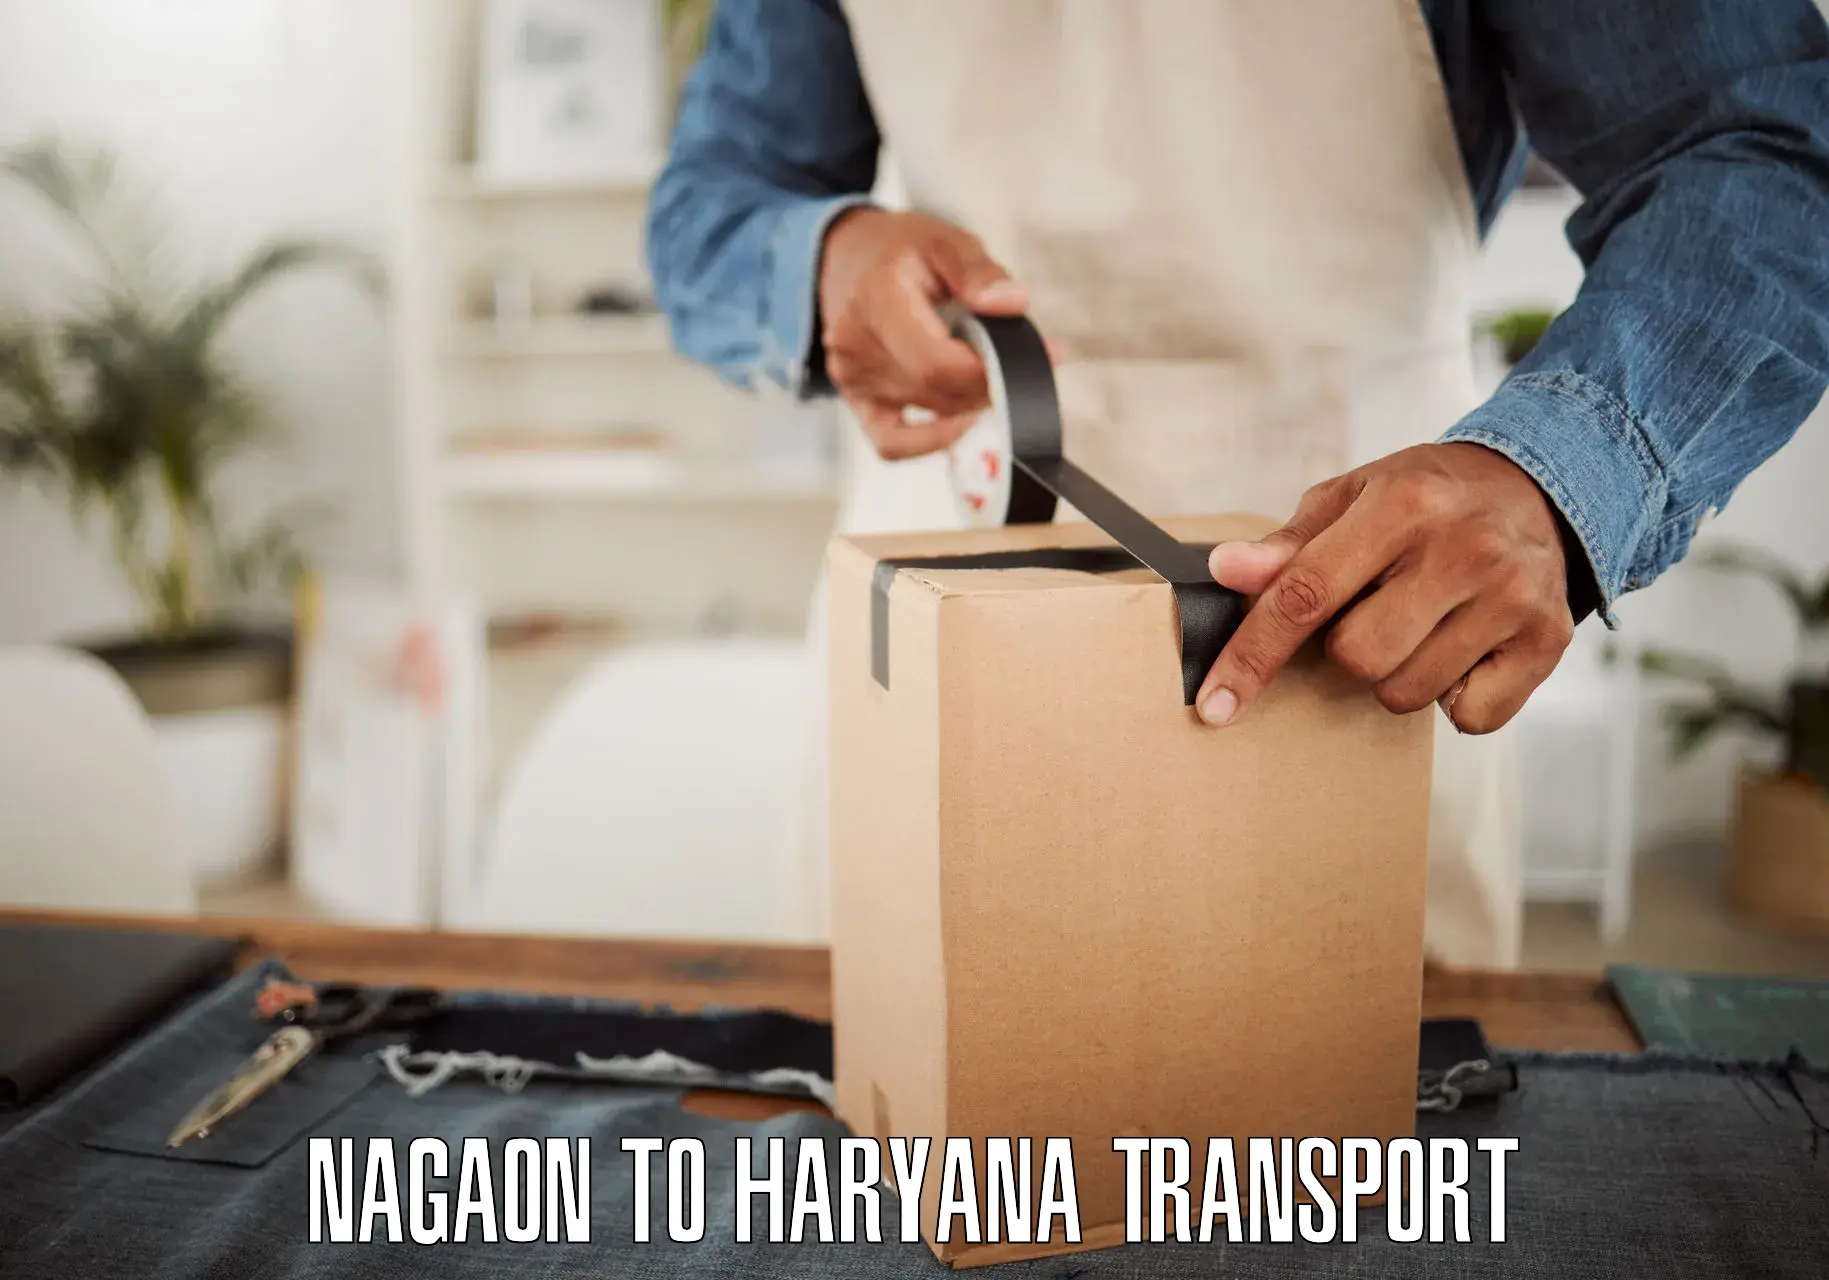 Delivery service Nagaon to Gurgaon